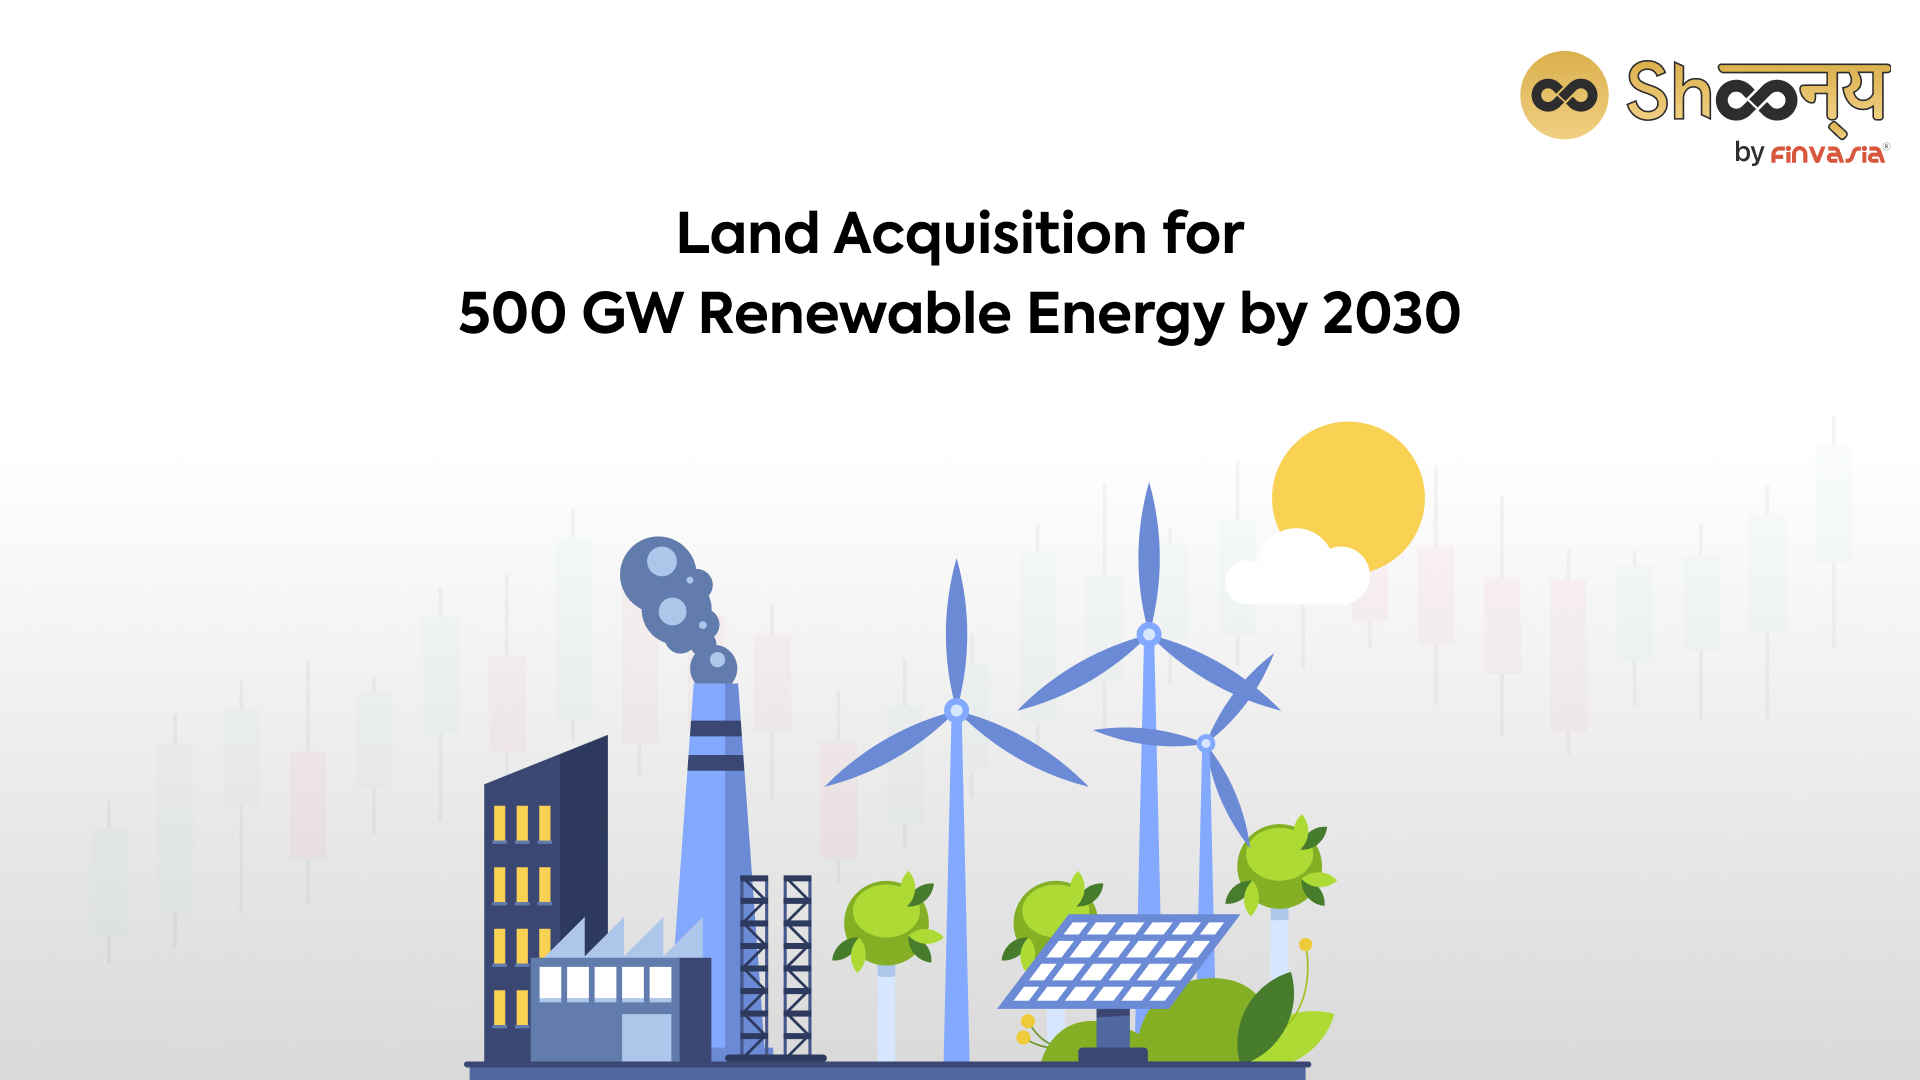 Land Acquisition for 500 GW Renewable Energy by 2030